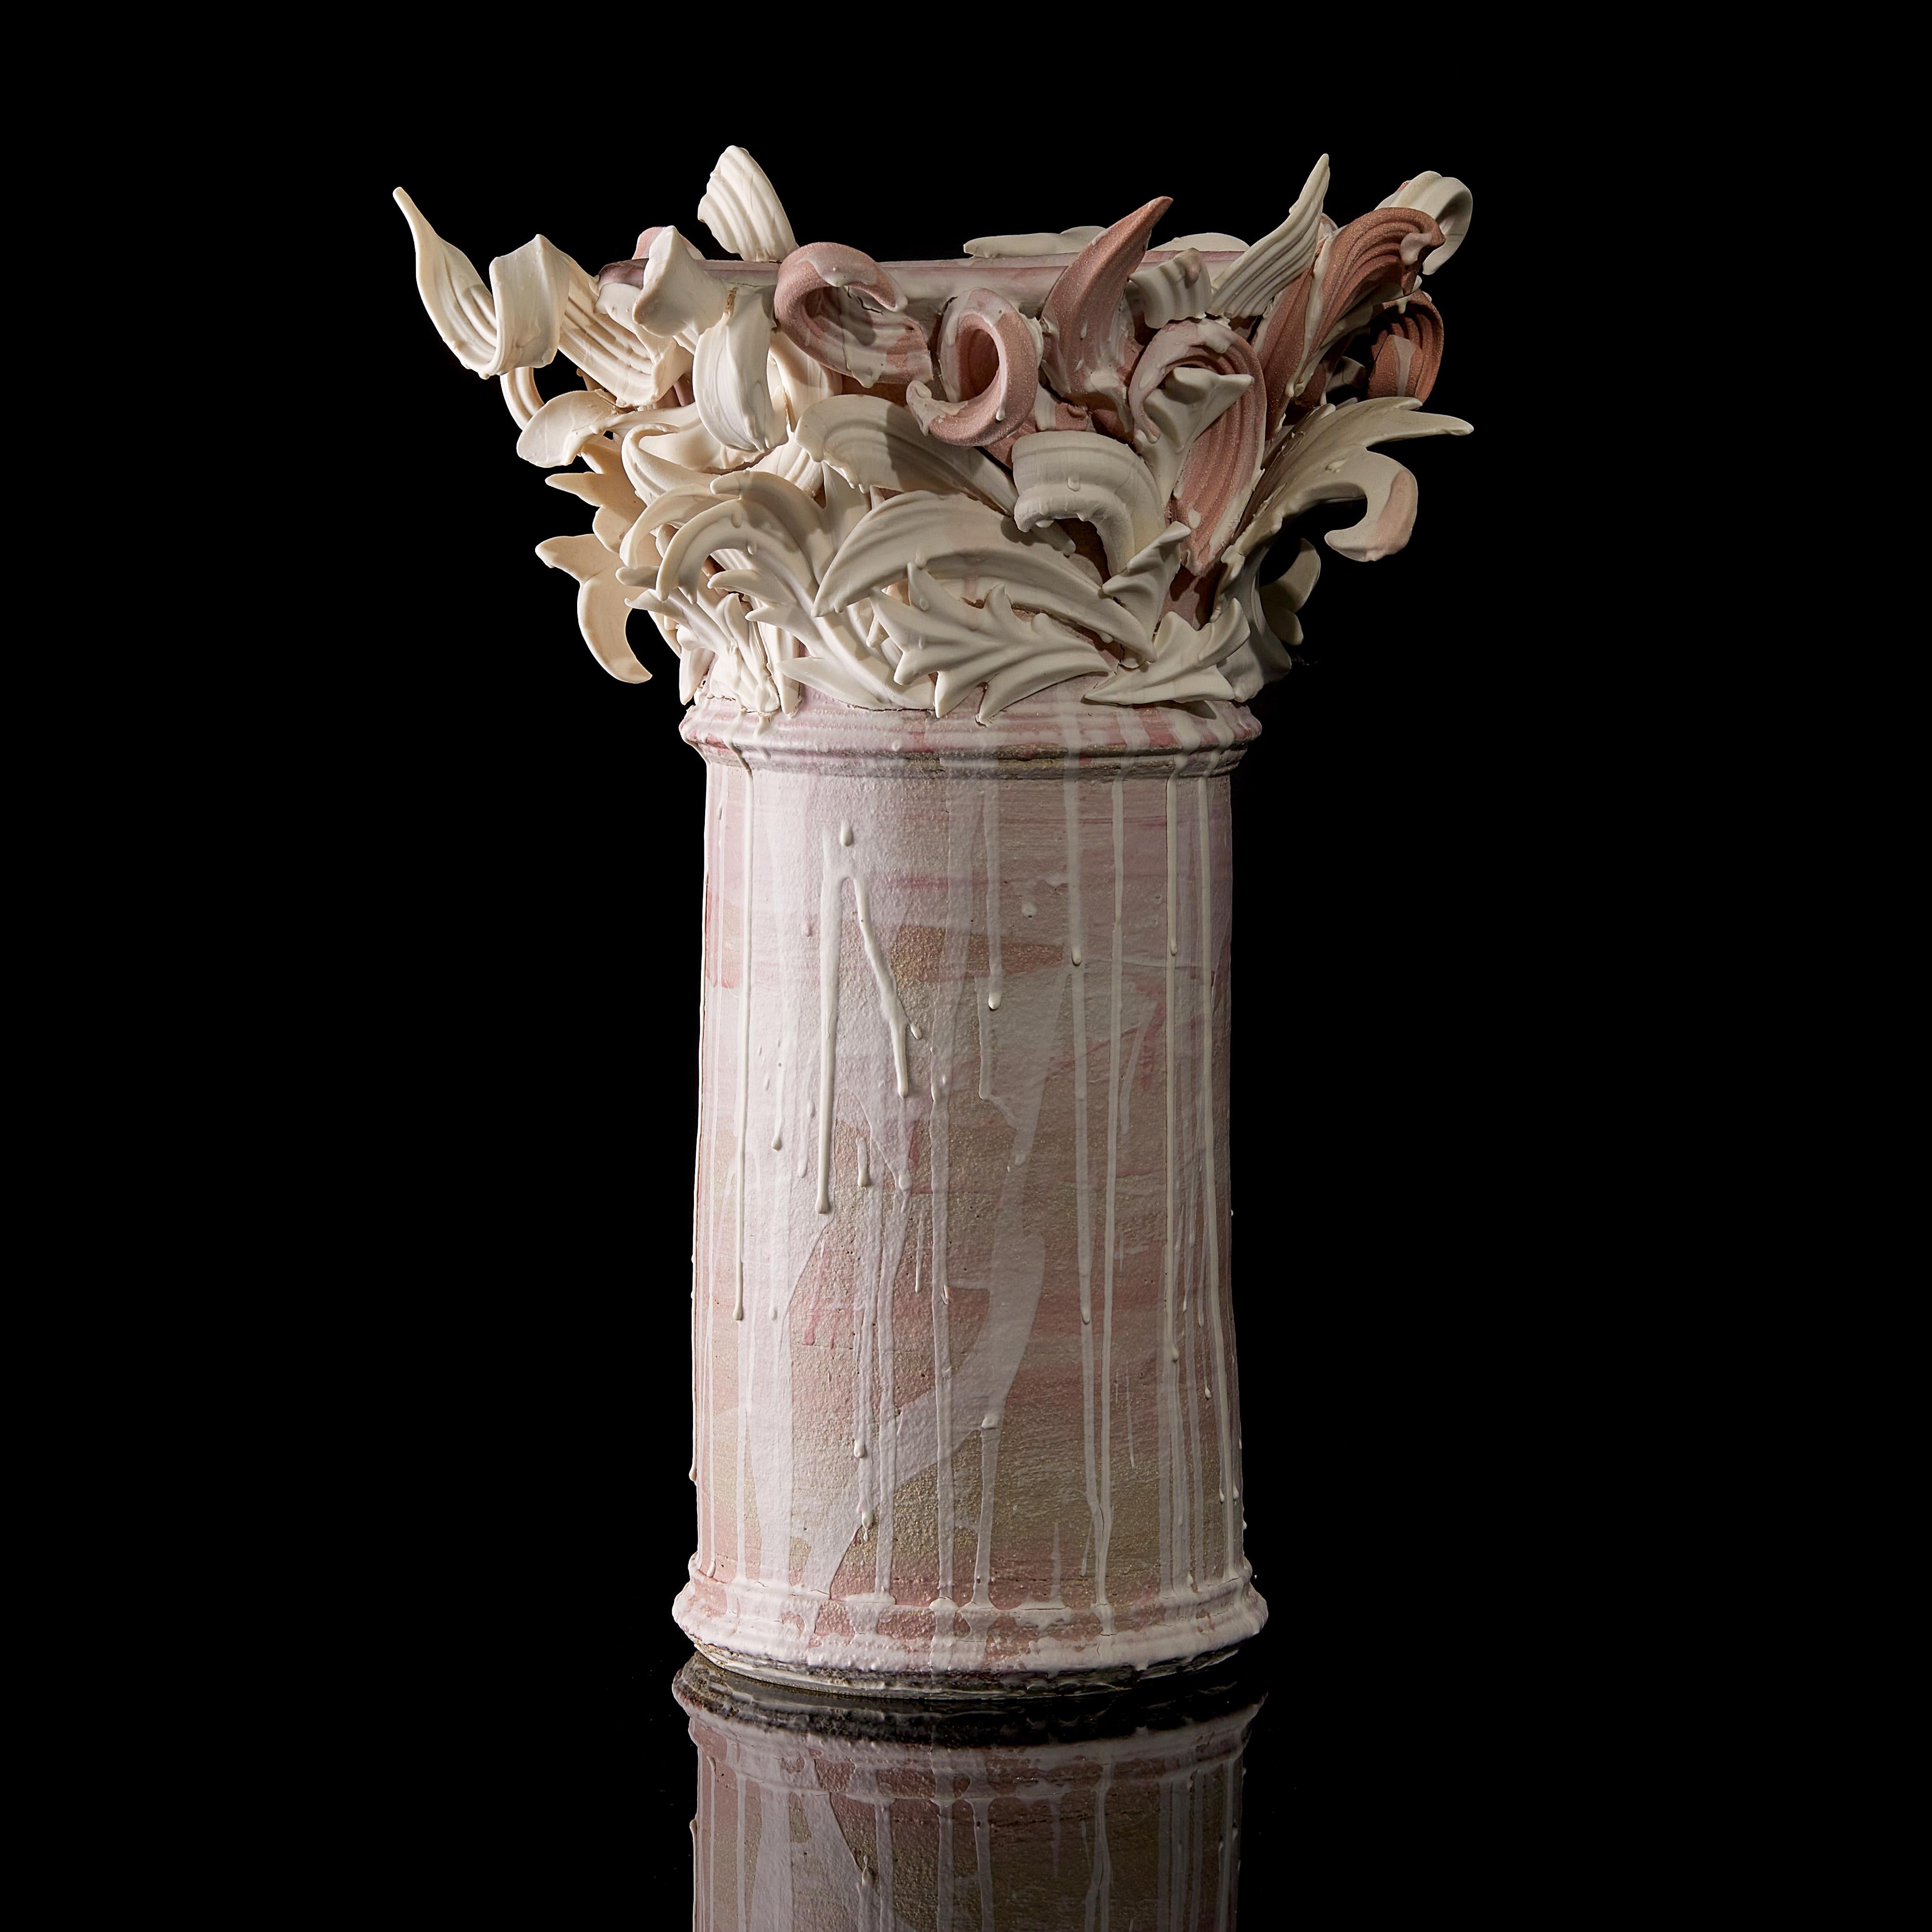 Colonnade II, a Unique Ceramic Sculptural Vase in Pink & White by Jo Taylor 2